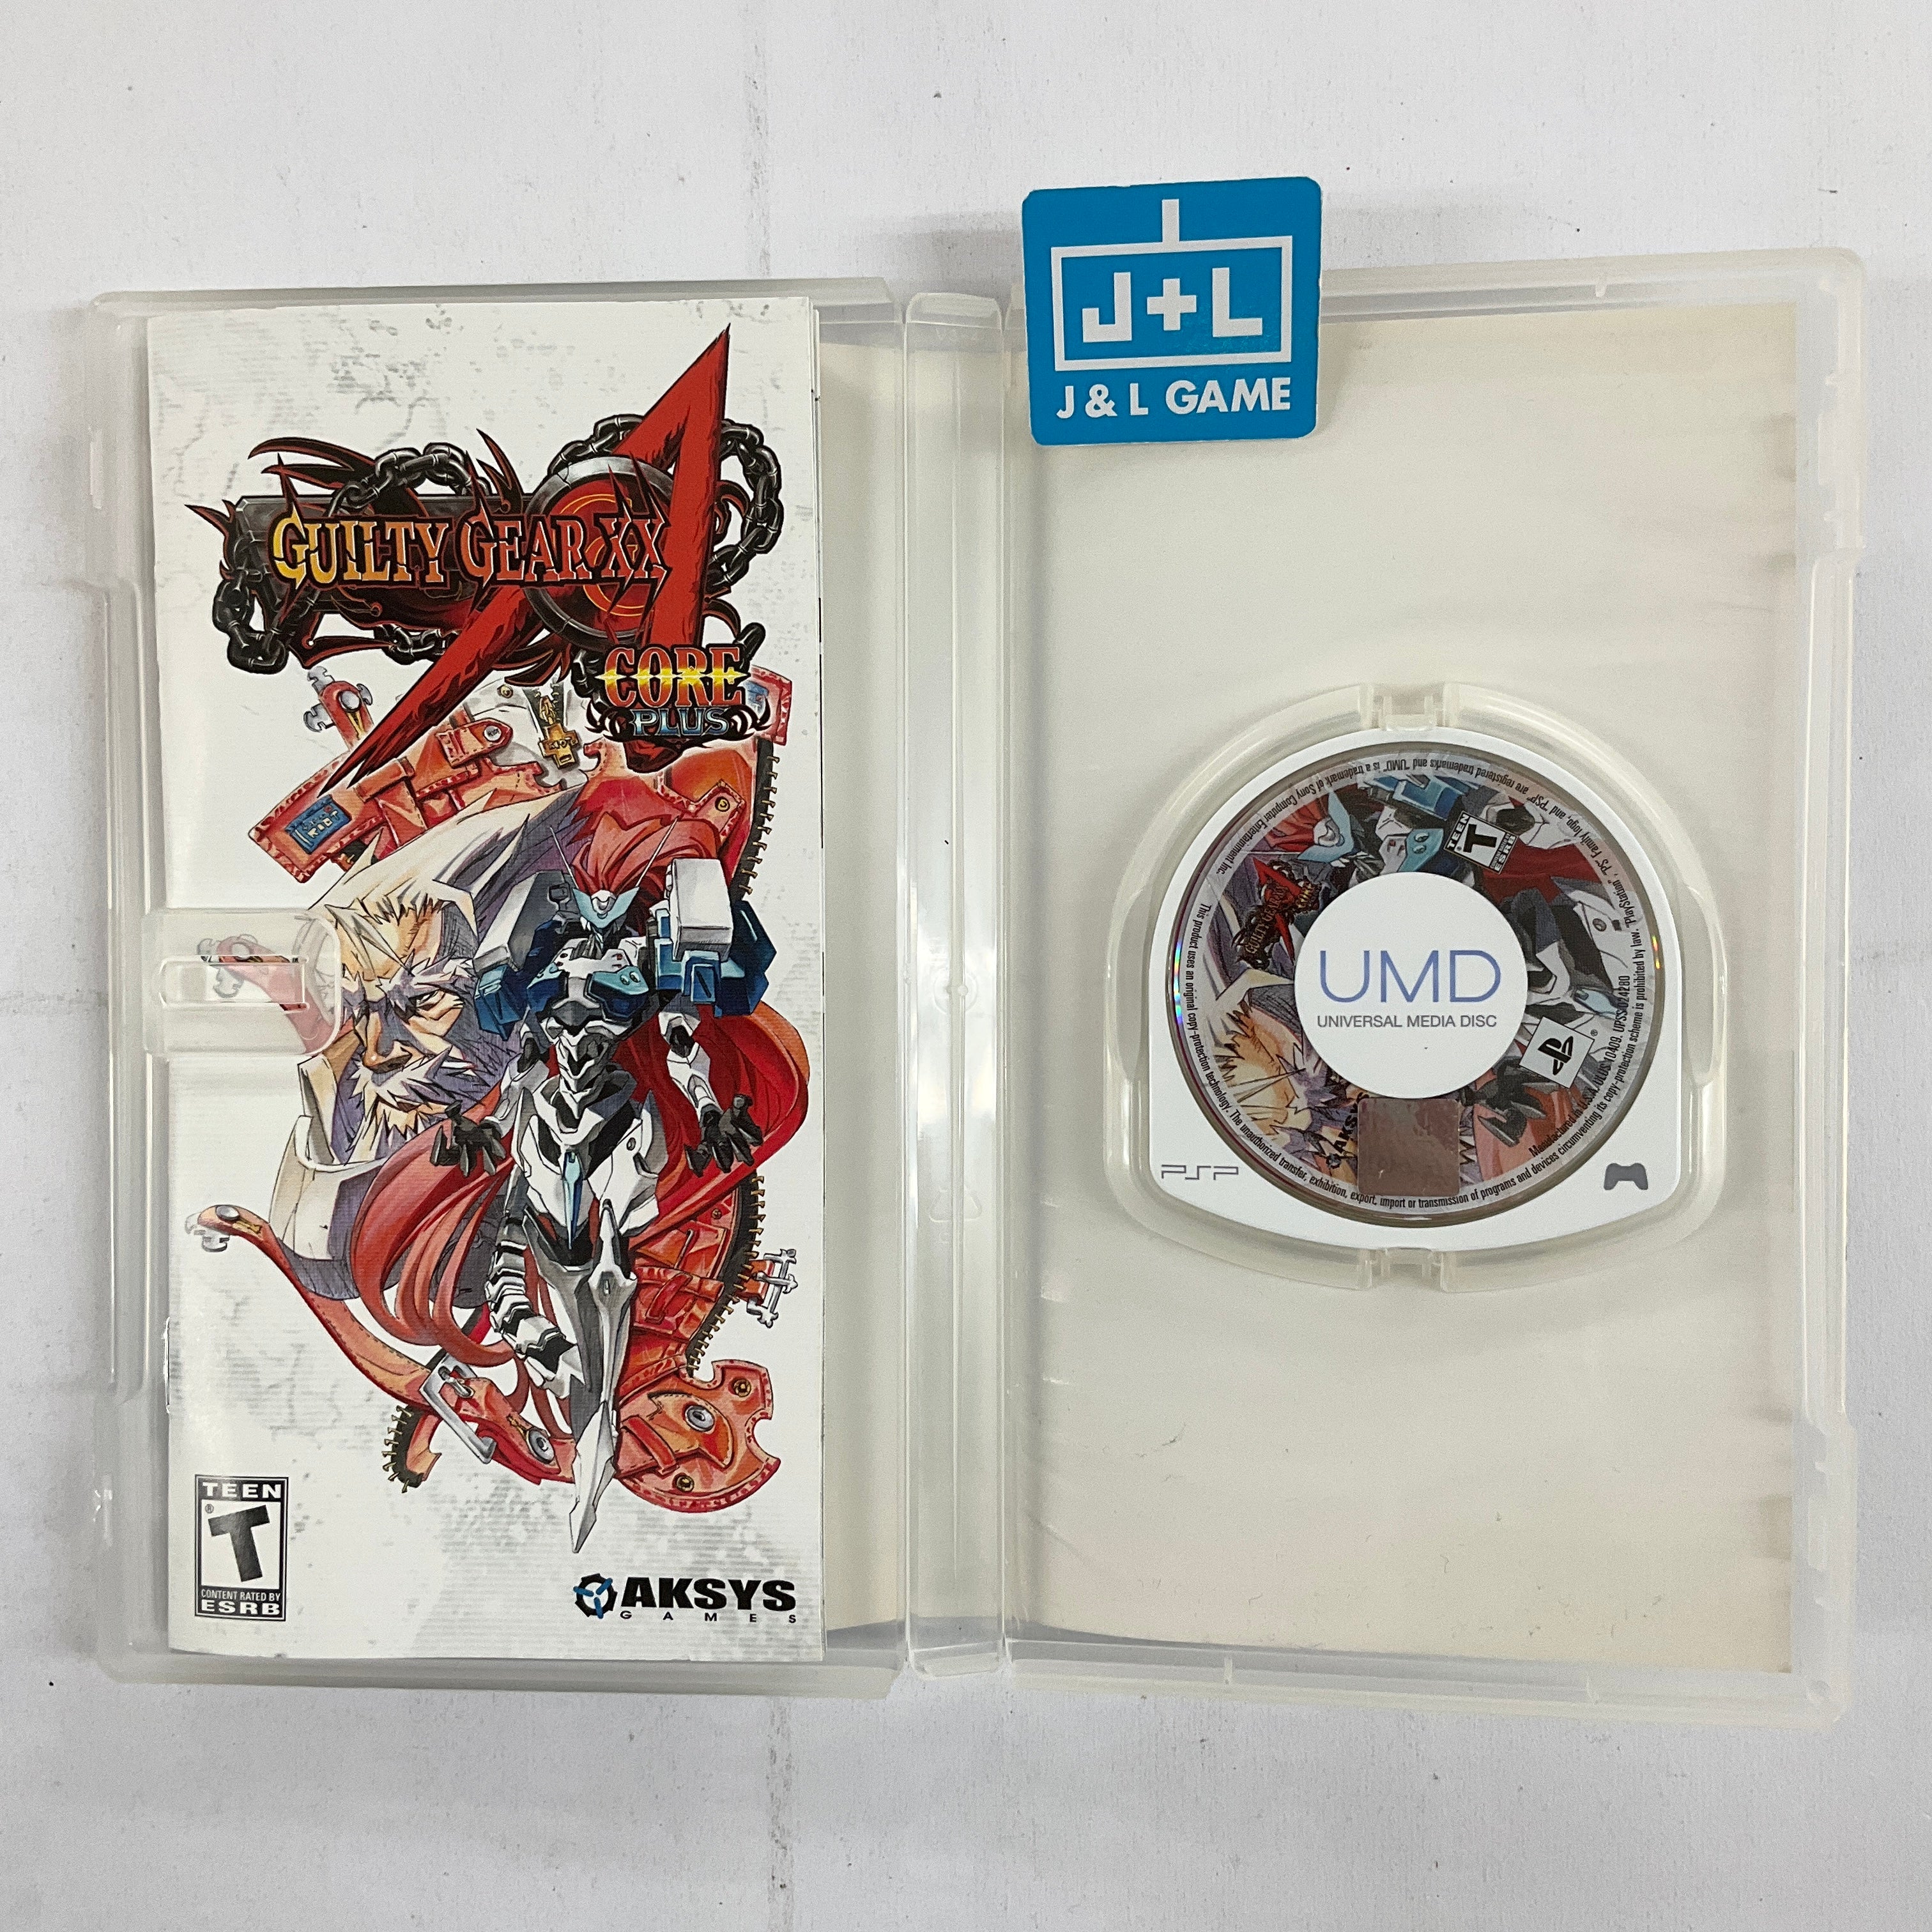 Guilty Gear XX Accent Core Plus - Sony PSP [Pre-Owned] Video Games Arc System Works   